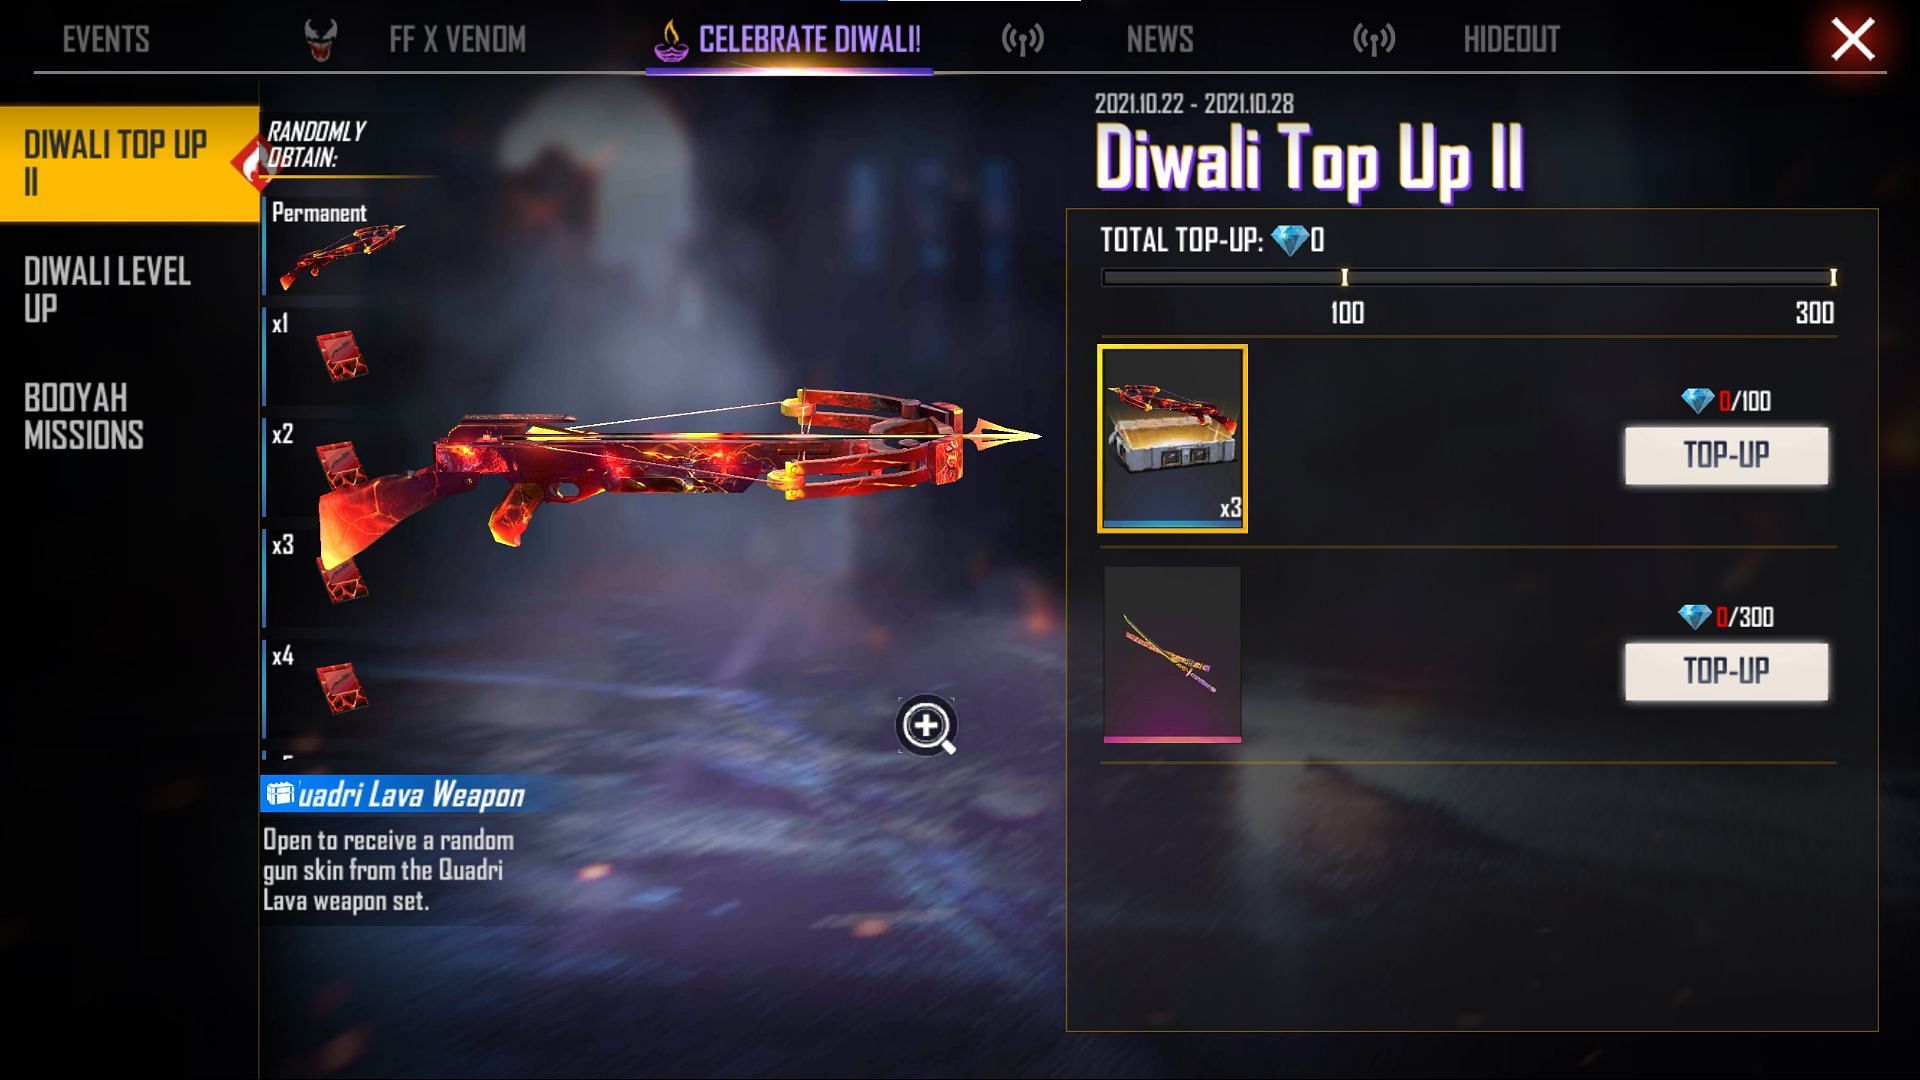 The Quadri Lava Weapon Loot Crate can be attained by purchasing 100 diamonds (Image via Free Fire)